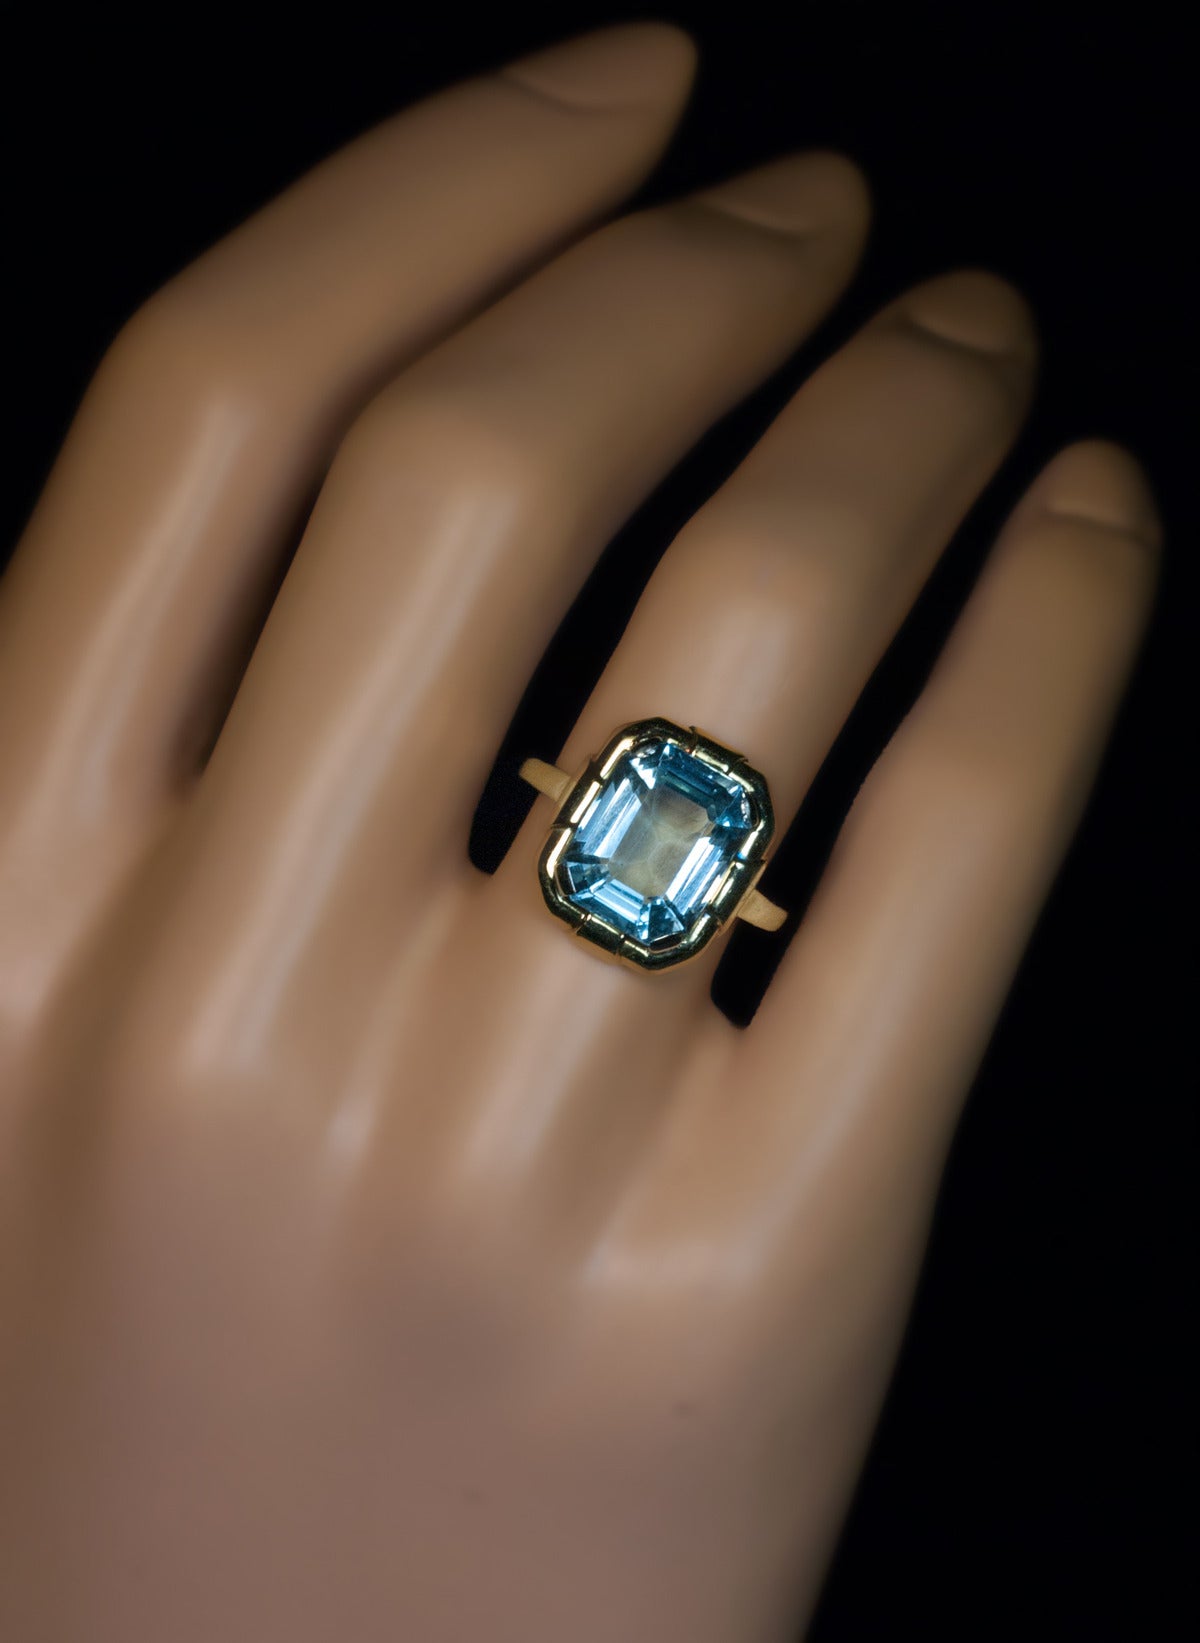 The 14K yellow gold ring features an emerald cut aquamarine (11.9 x 9.5 x 6 mm, approximately 4.65 ct).

 Ring size 8  (18 mm)